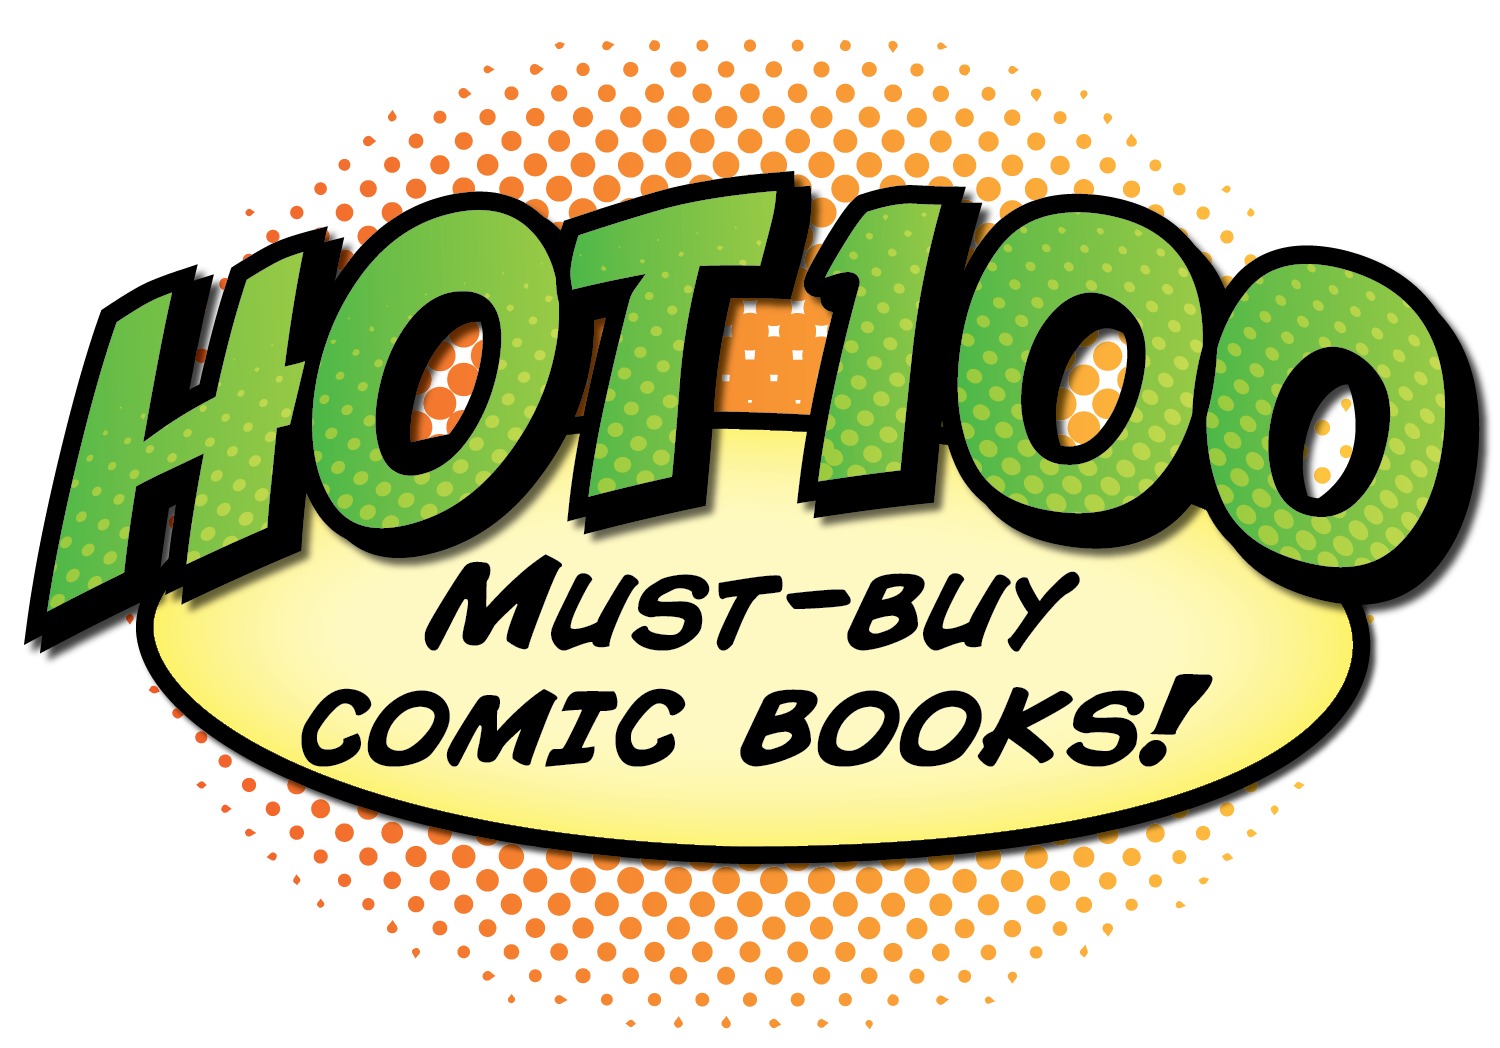 Hot 100 comics list to invest in, 2019 edition!